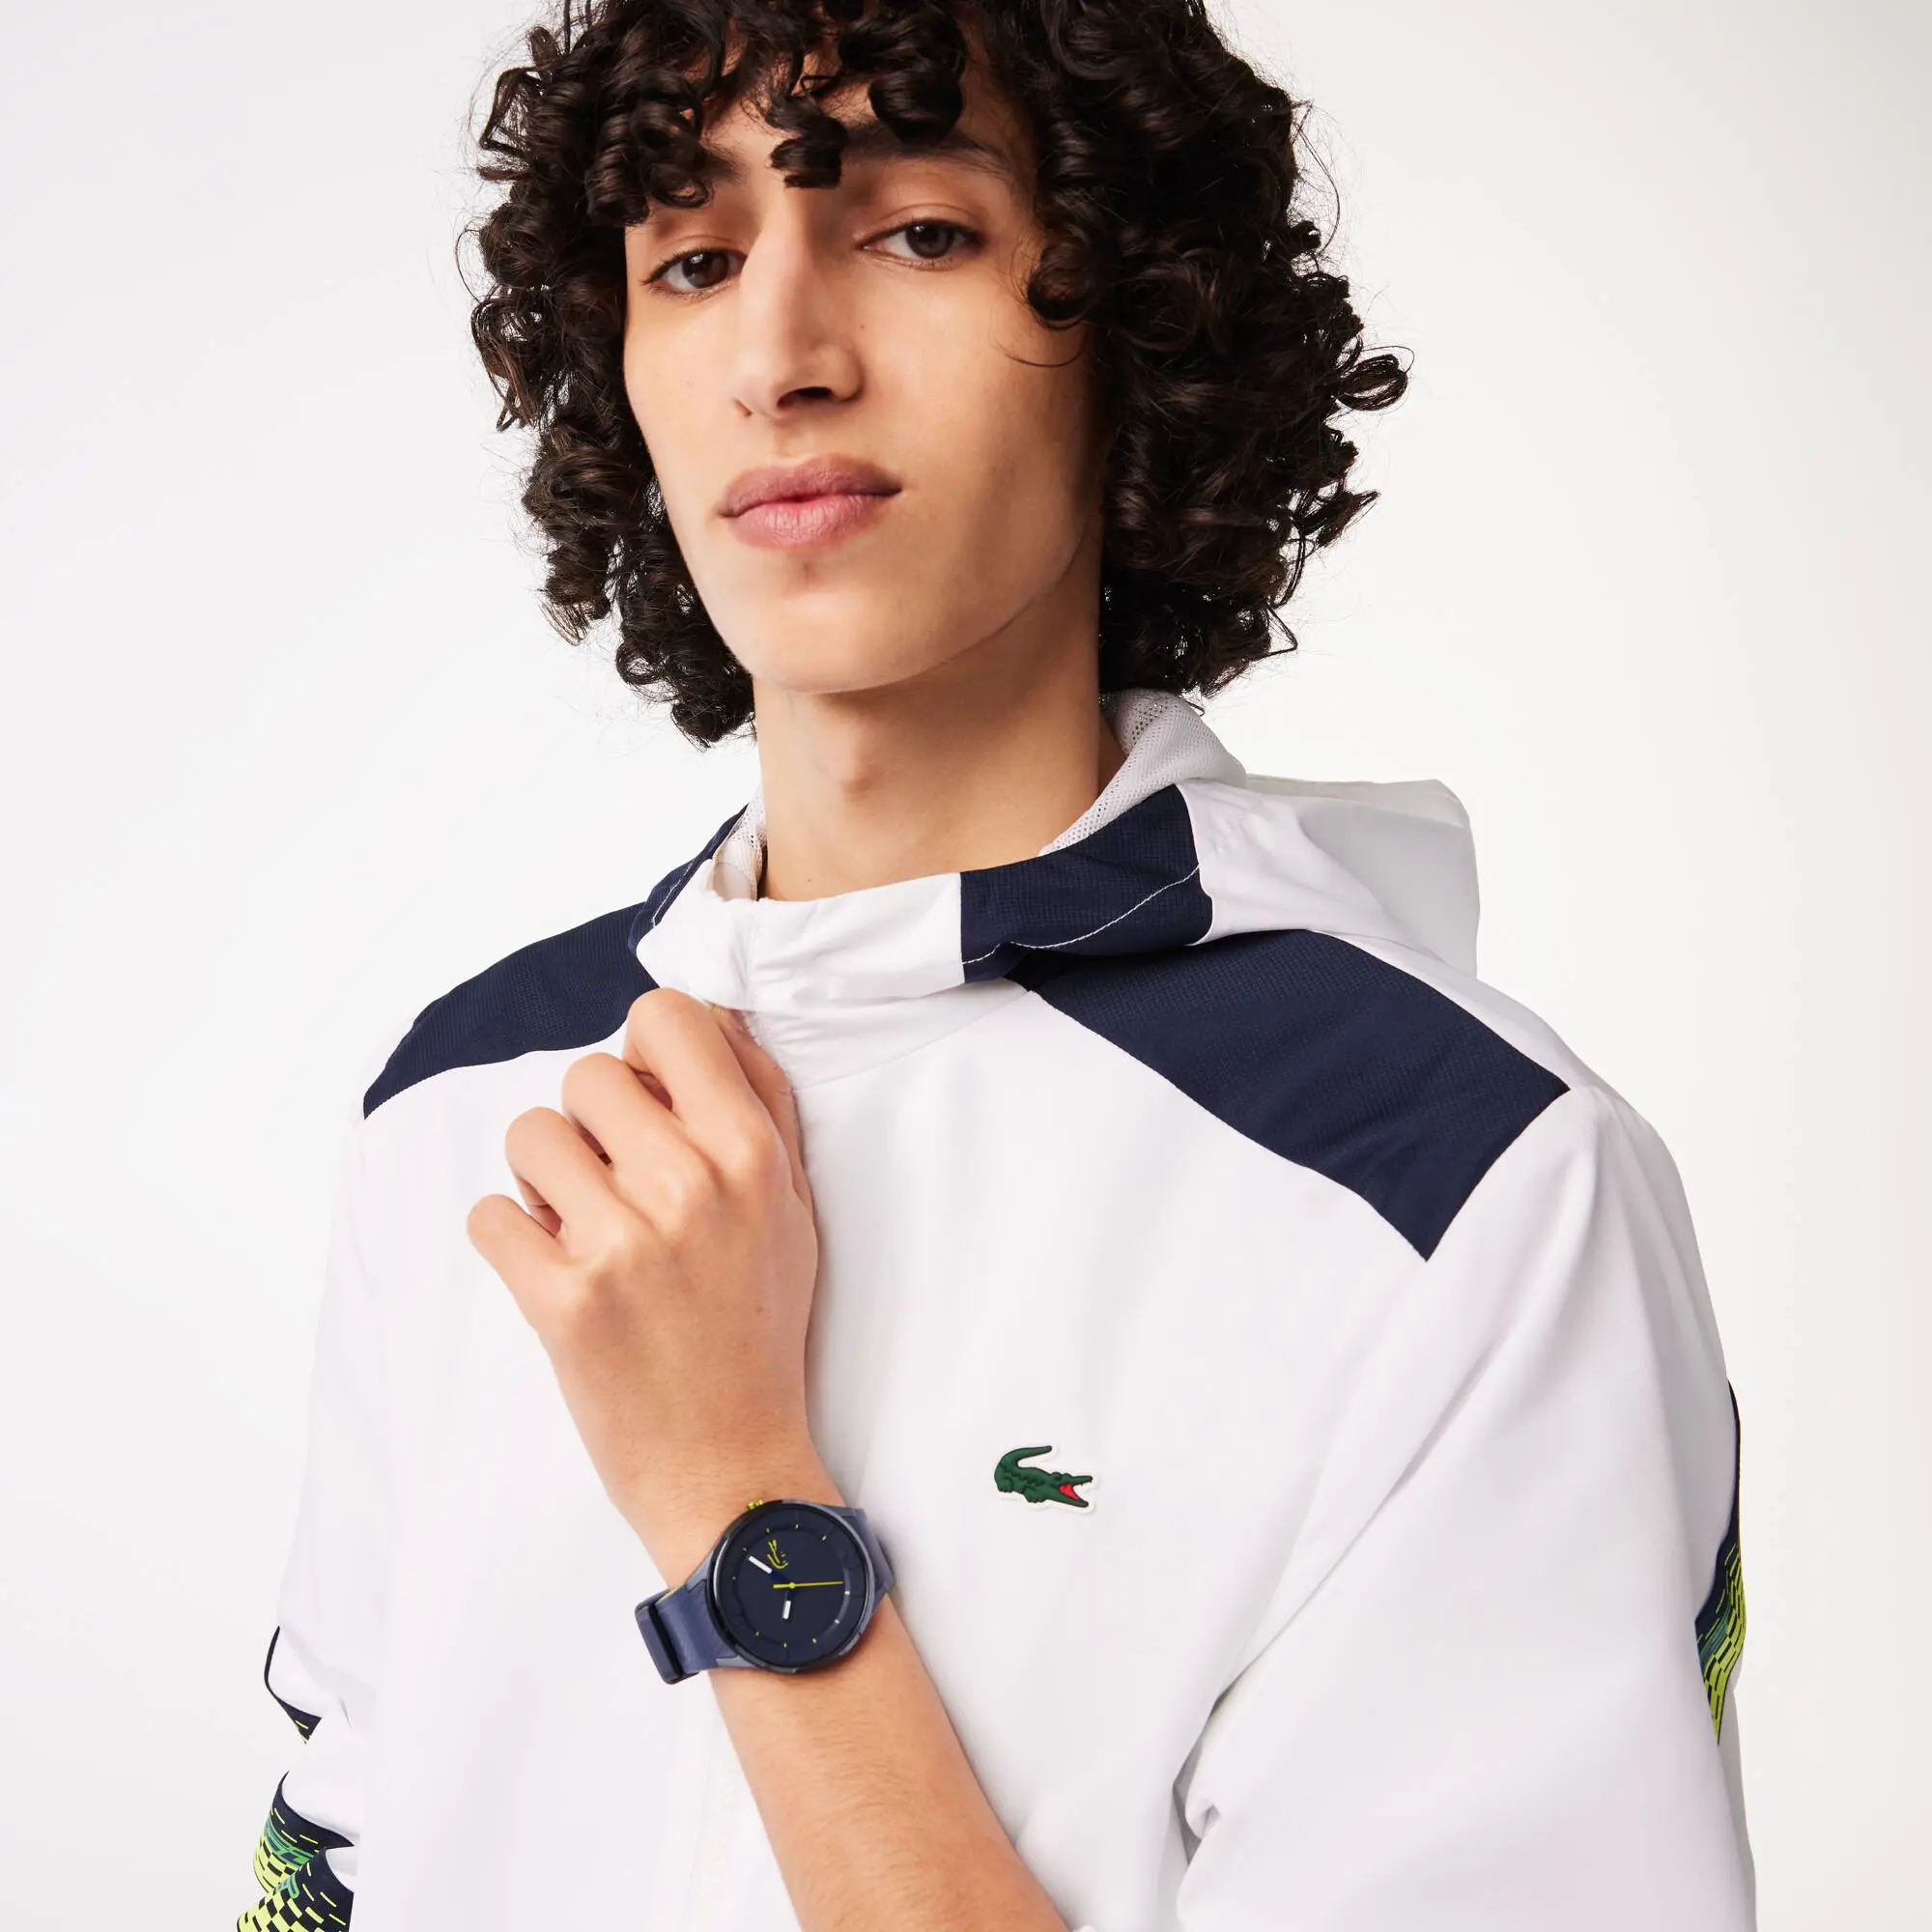 Lacoste Ollie 3 Hands Watch Blue Silicone. 1